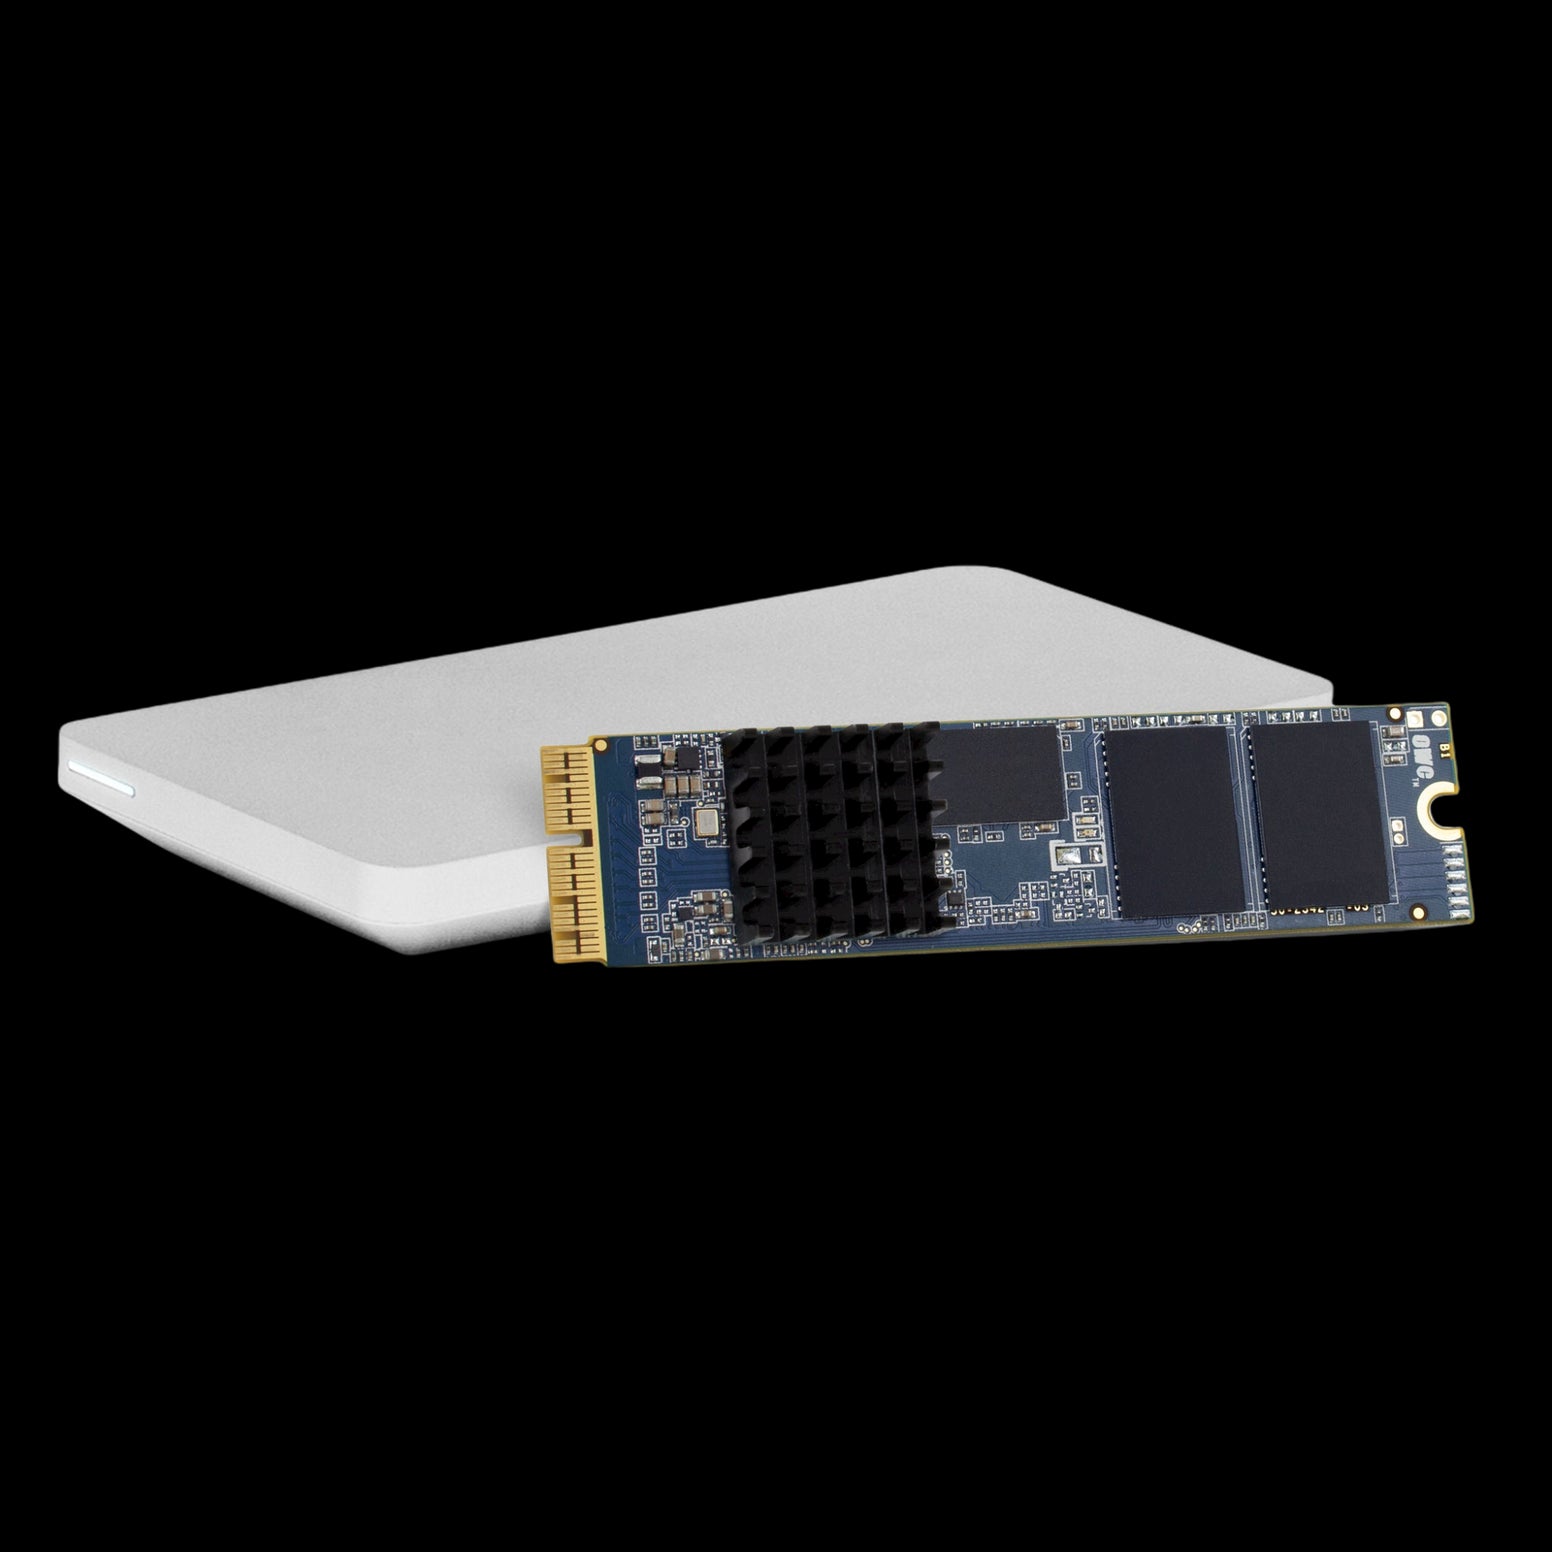 OWC 240GB Aura Pro X2 SSD with Upgrade Kit for Mac Pro (Late 2013) - Discontinued